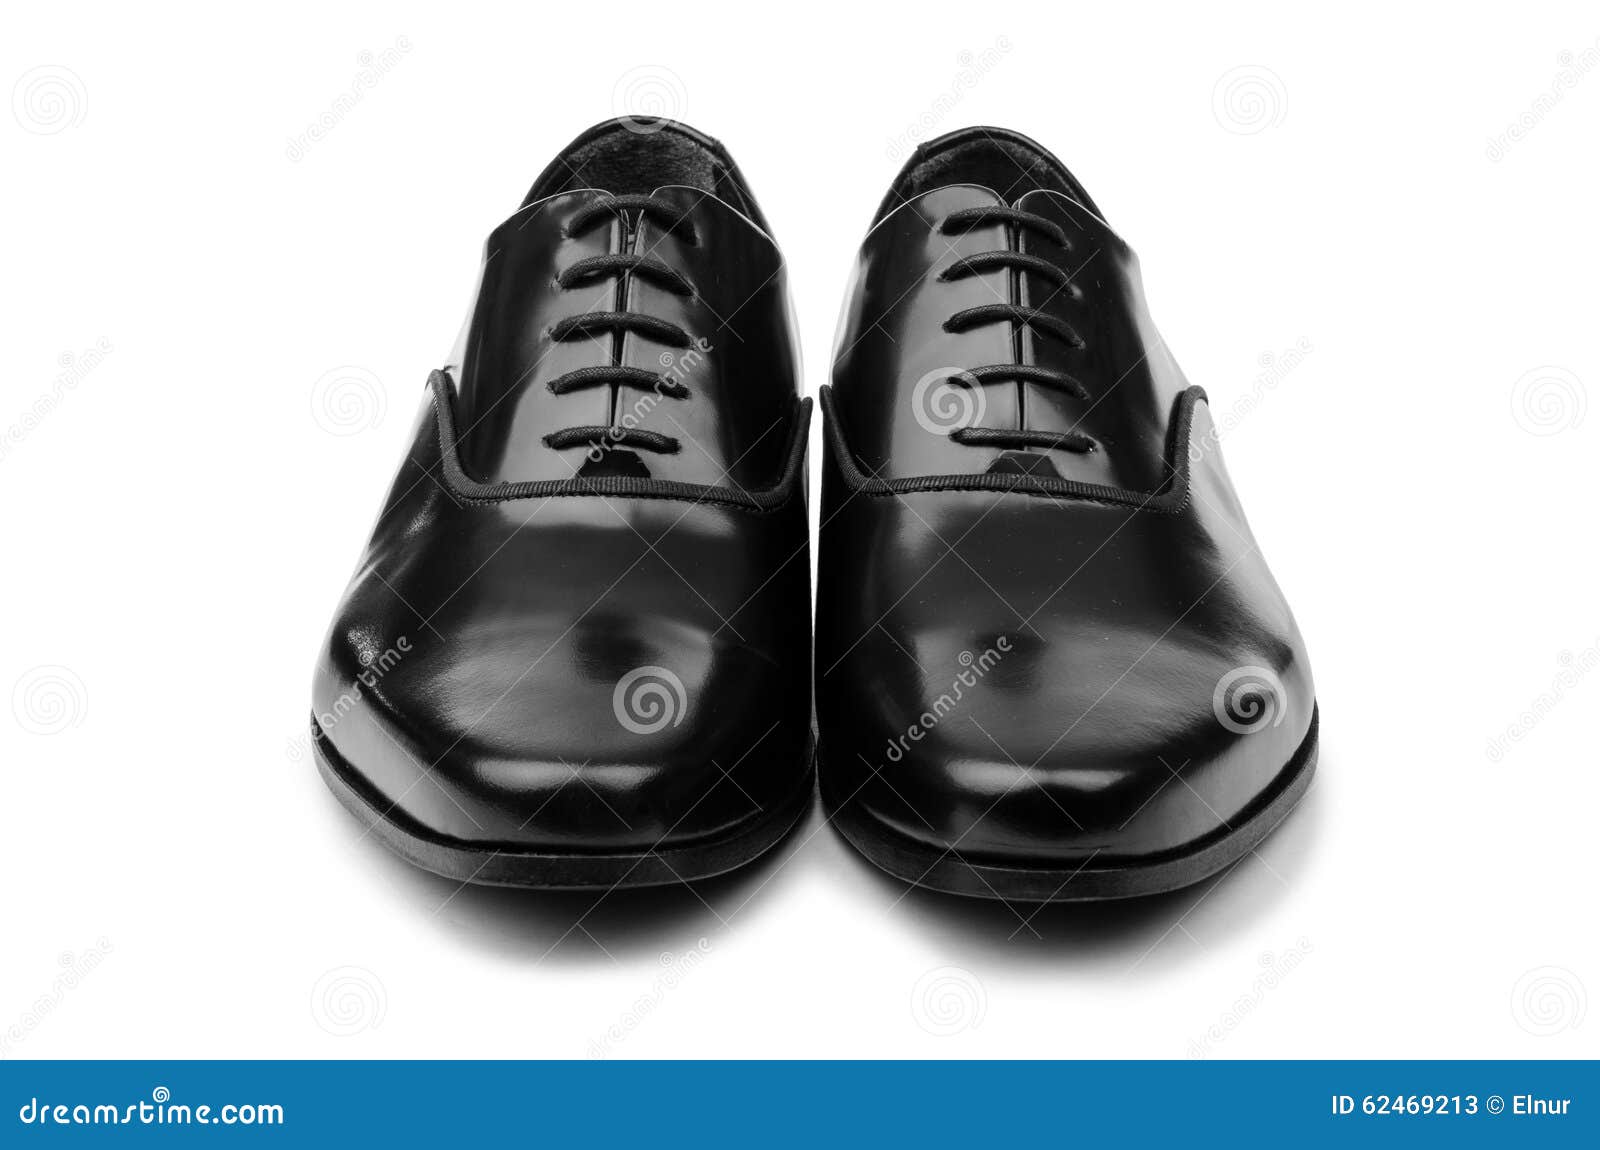 Male Black Shoes Isolated on White Stock Image - Image of closeup ...